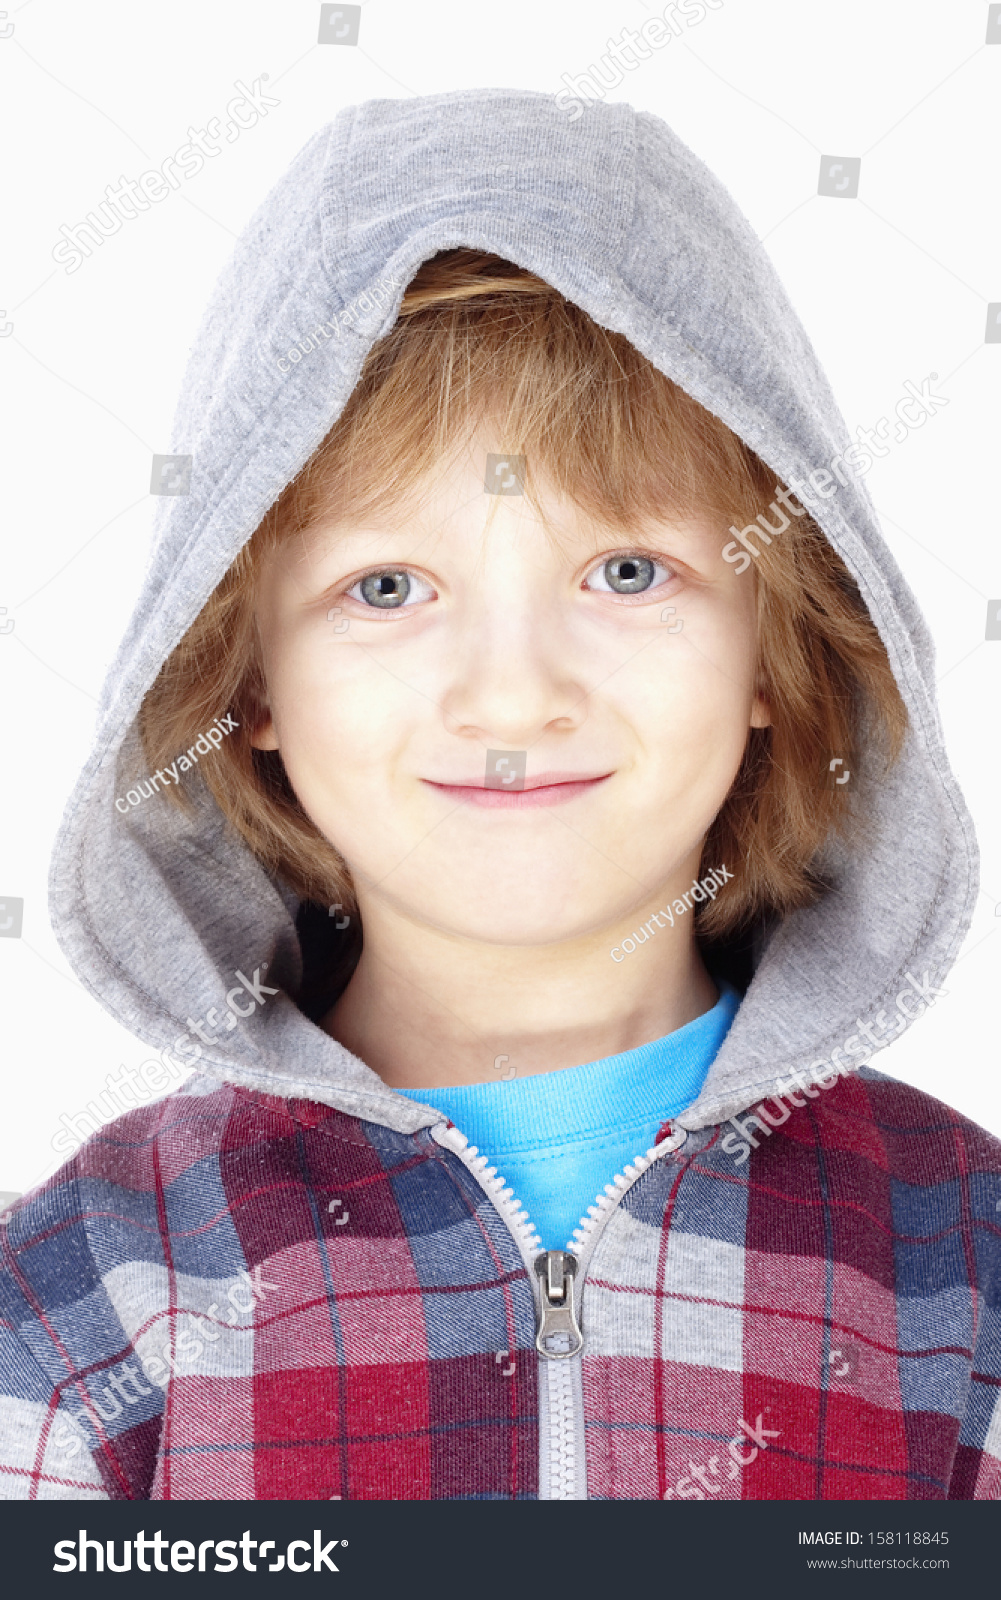 Portrait Of A Boy With Blond Hair And Hood - Isolated On White Stock ...